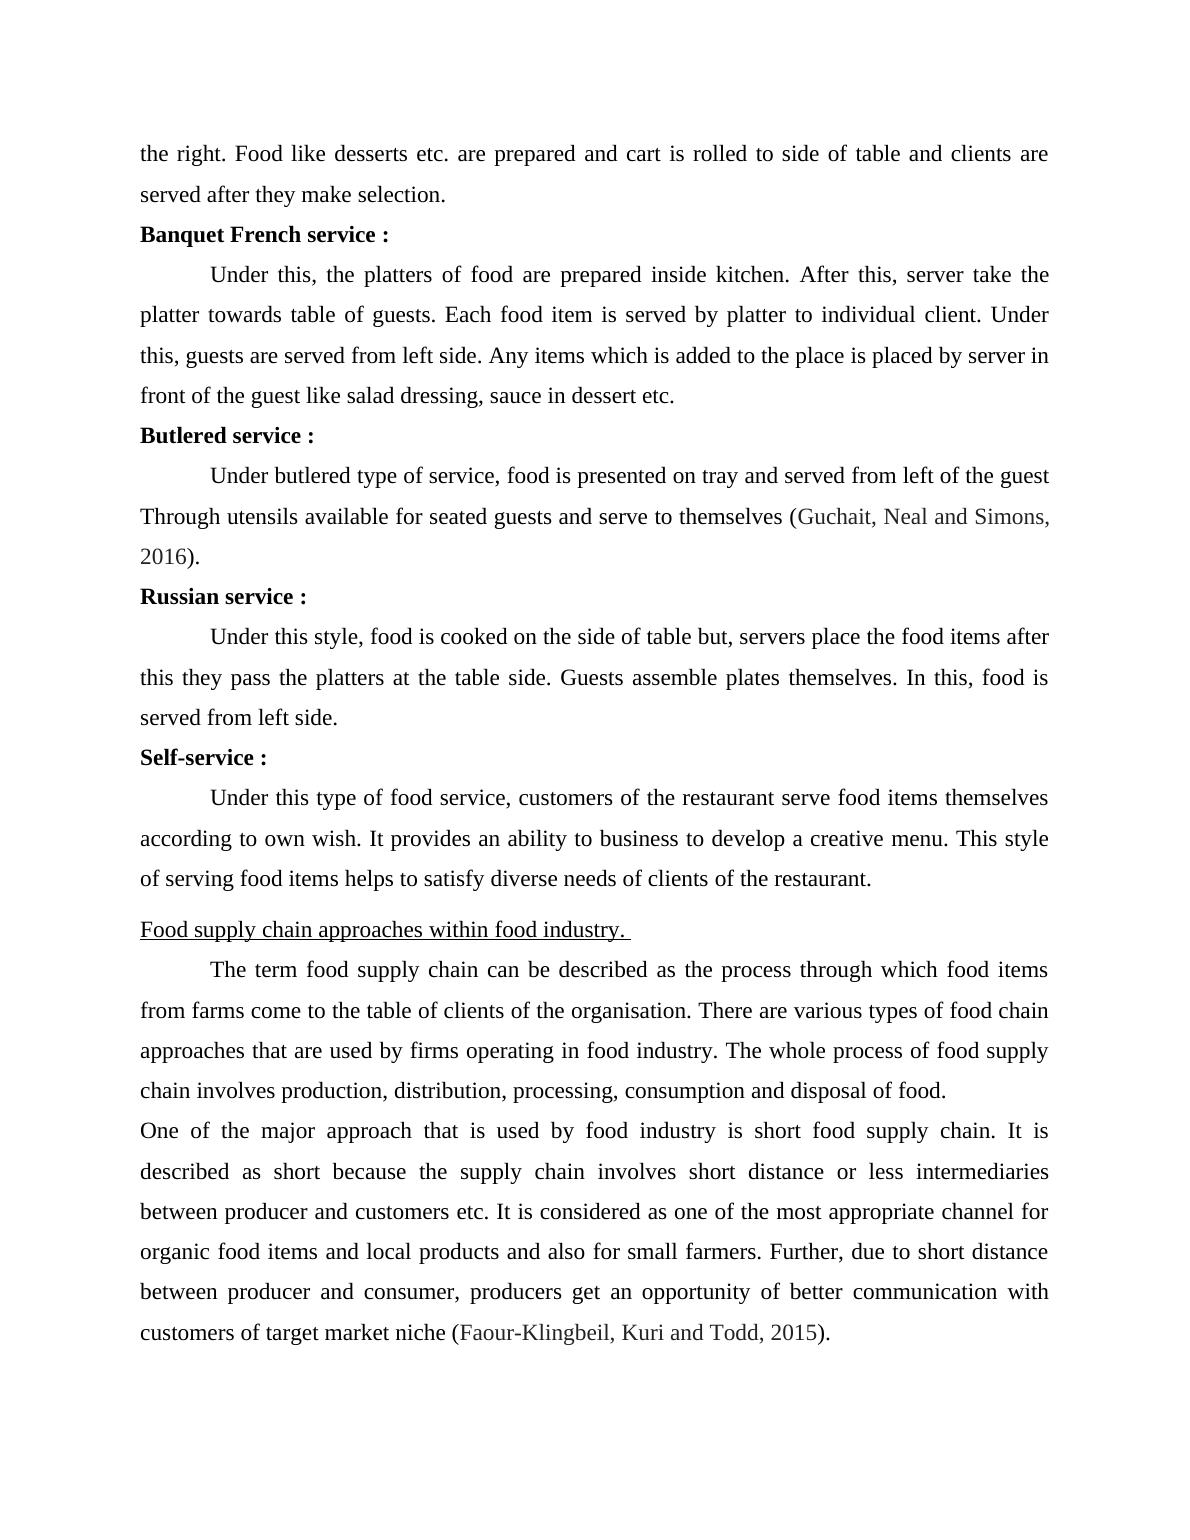 Food safety management Solution Assignment - Doc_4